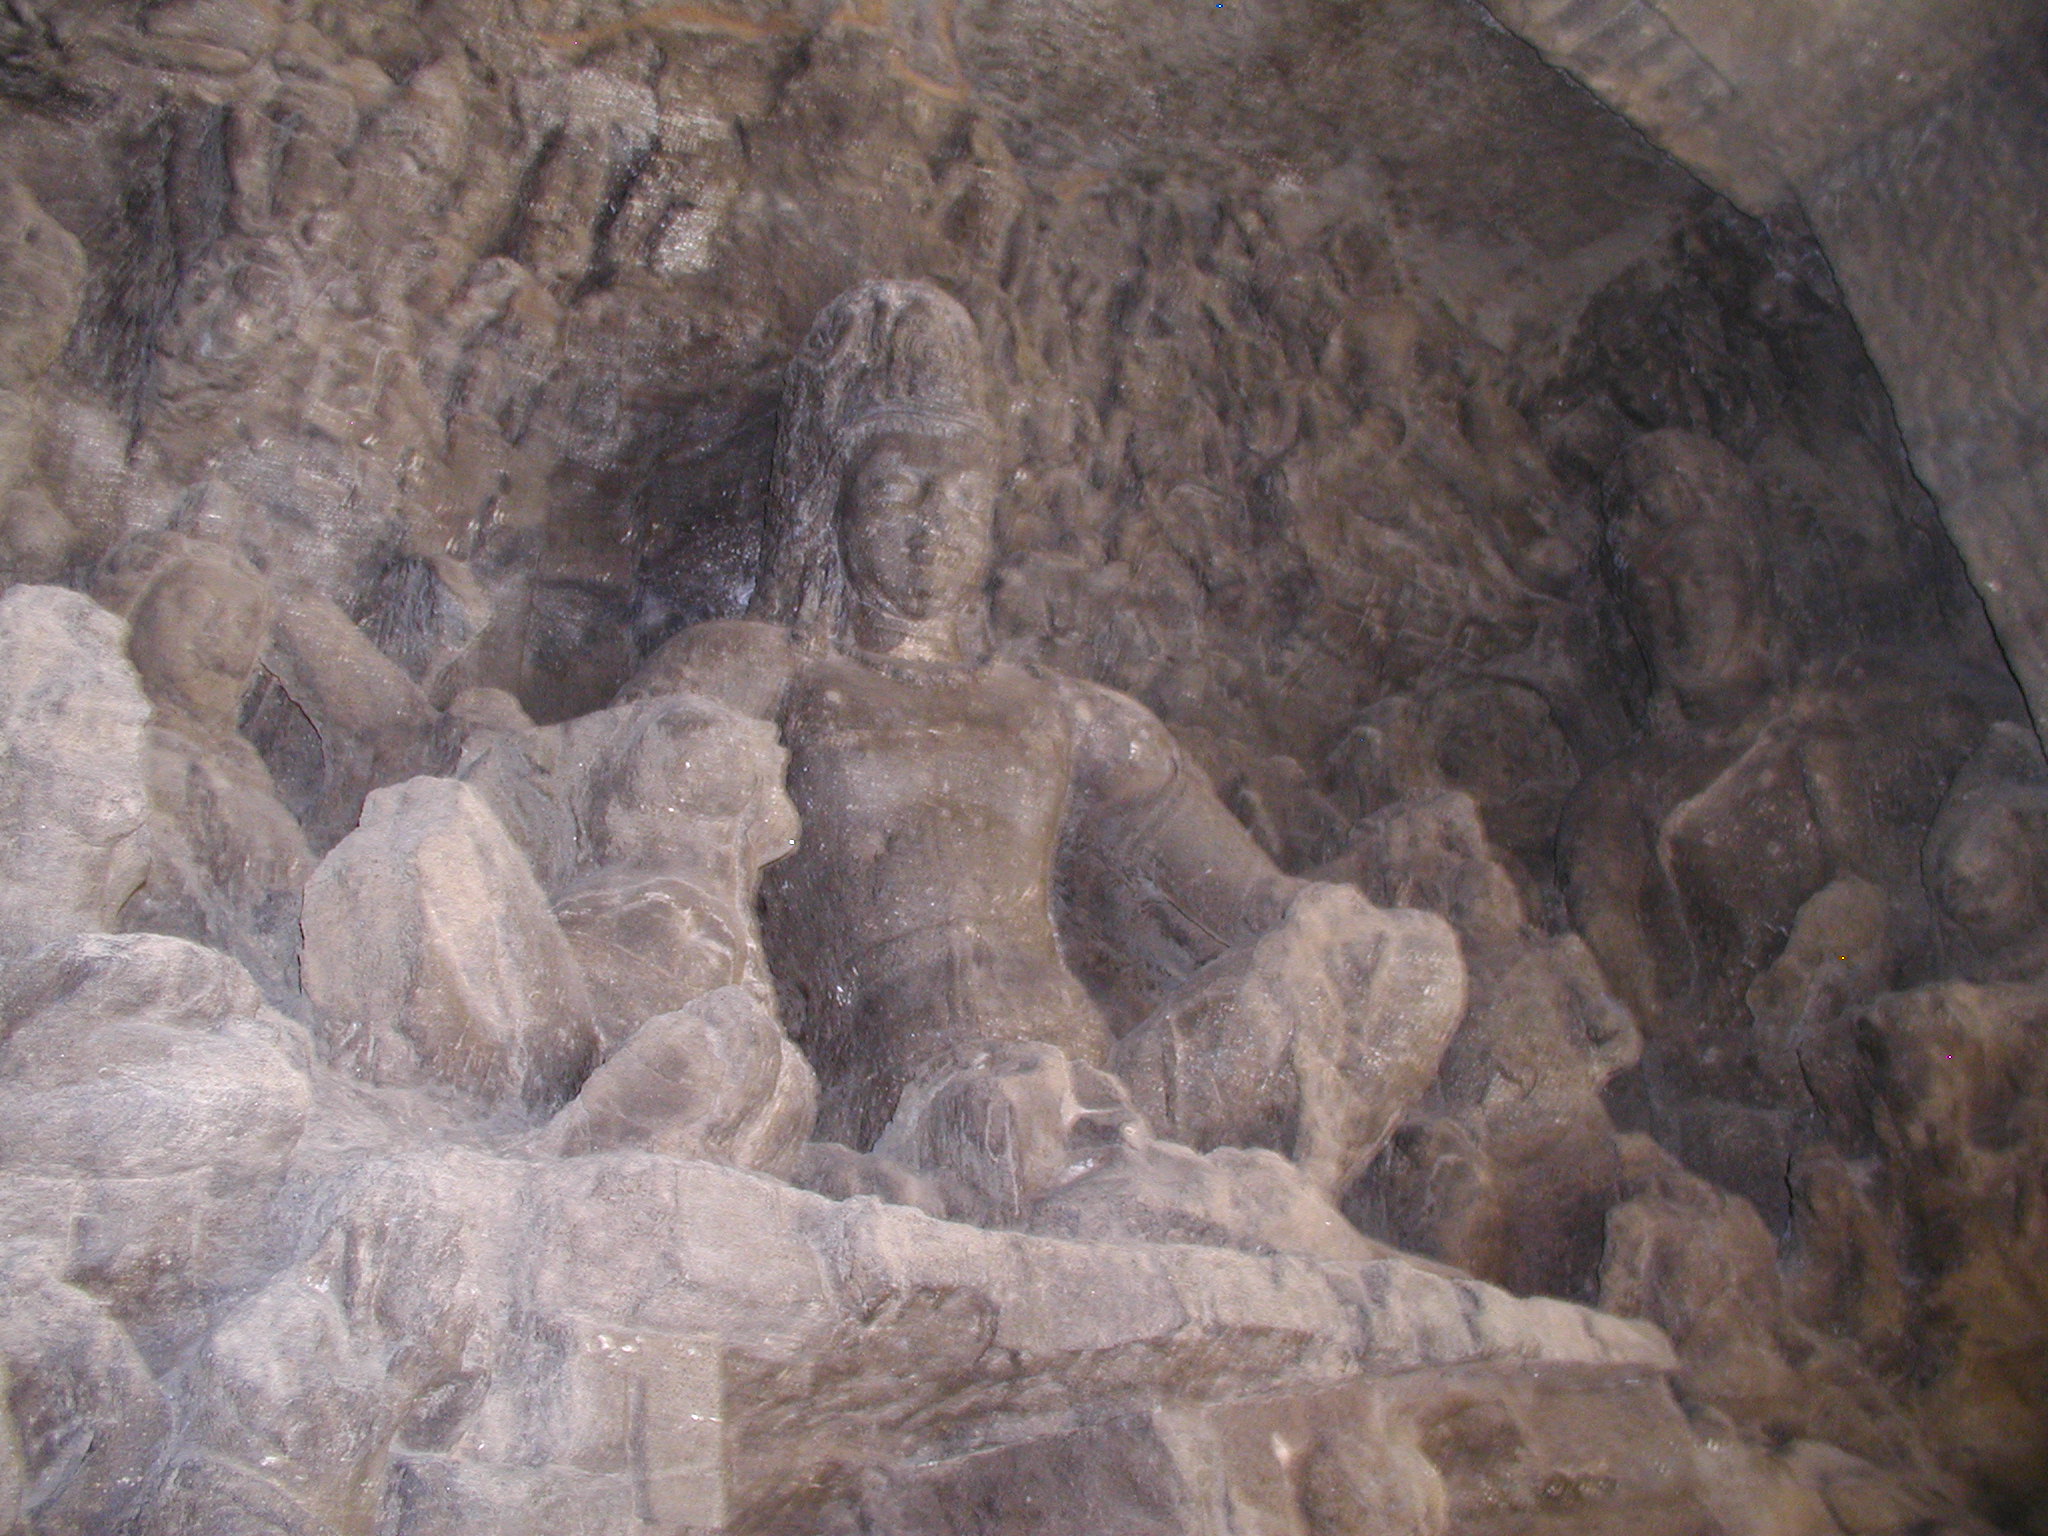 A carving in the wall of the Ellora Caves